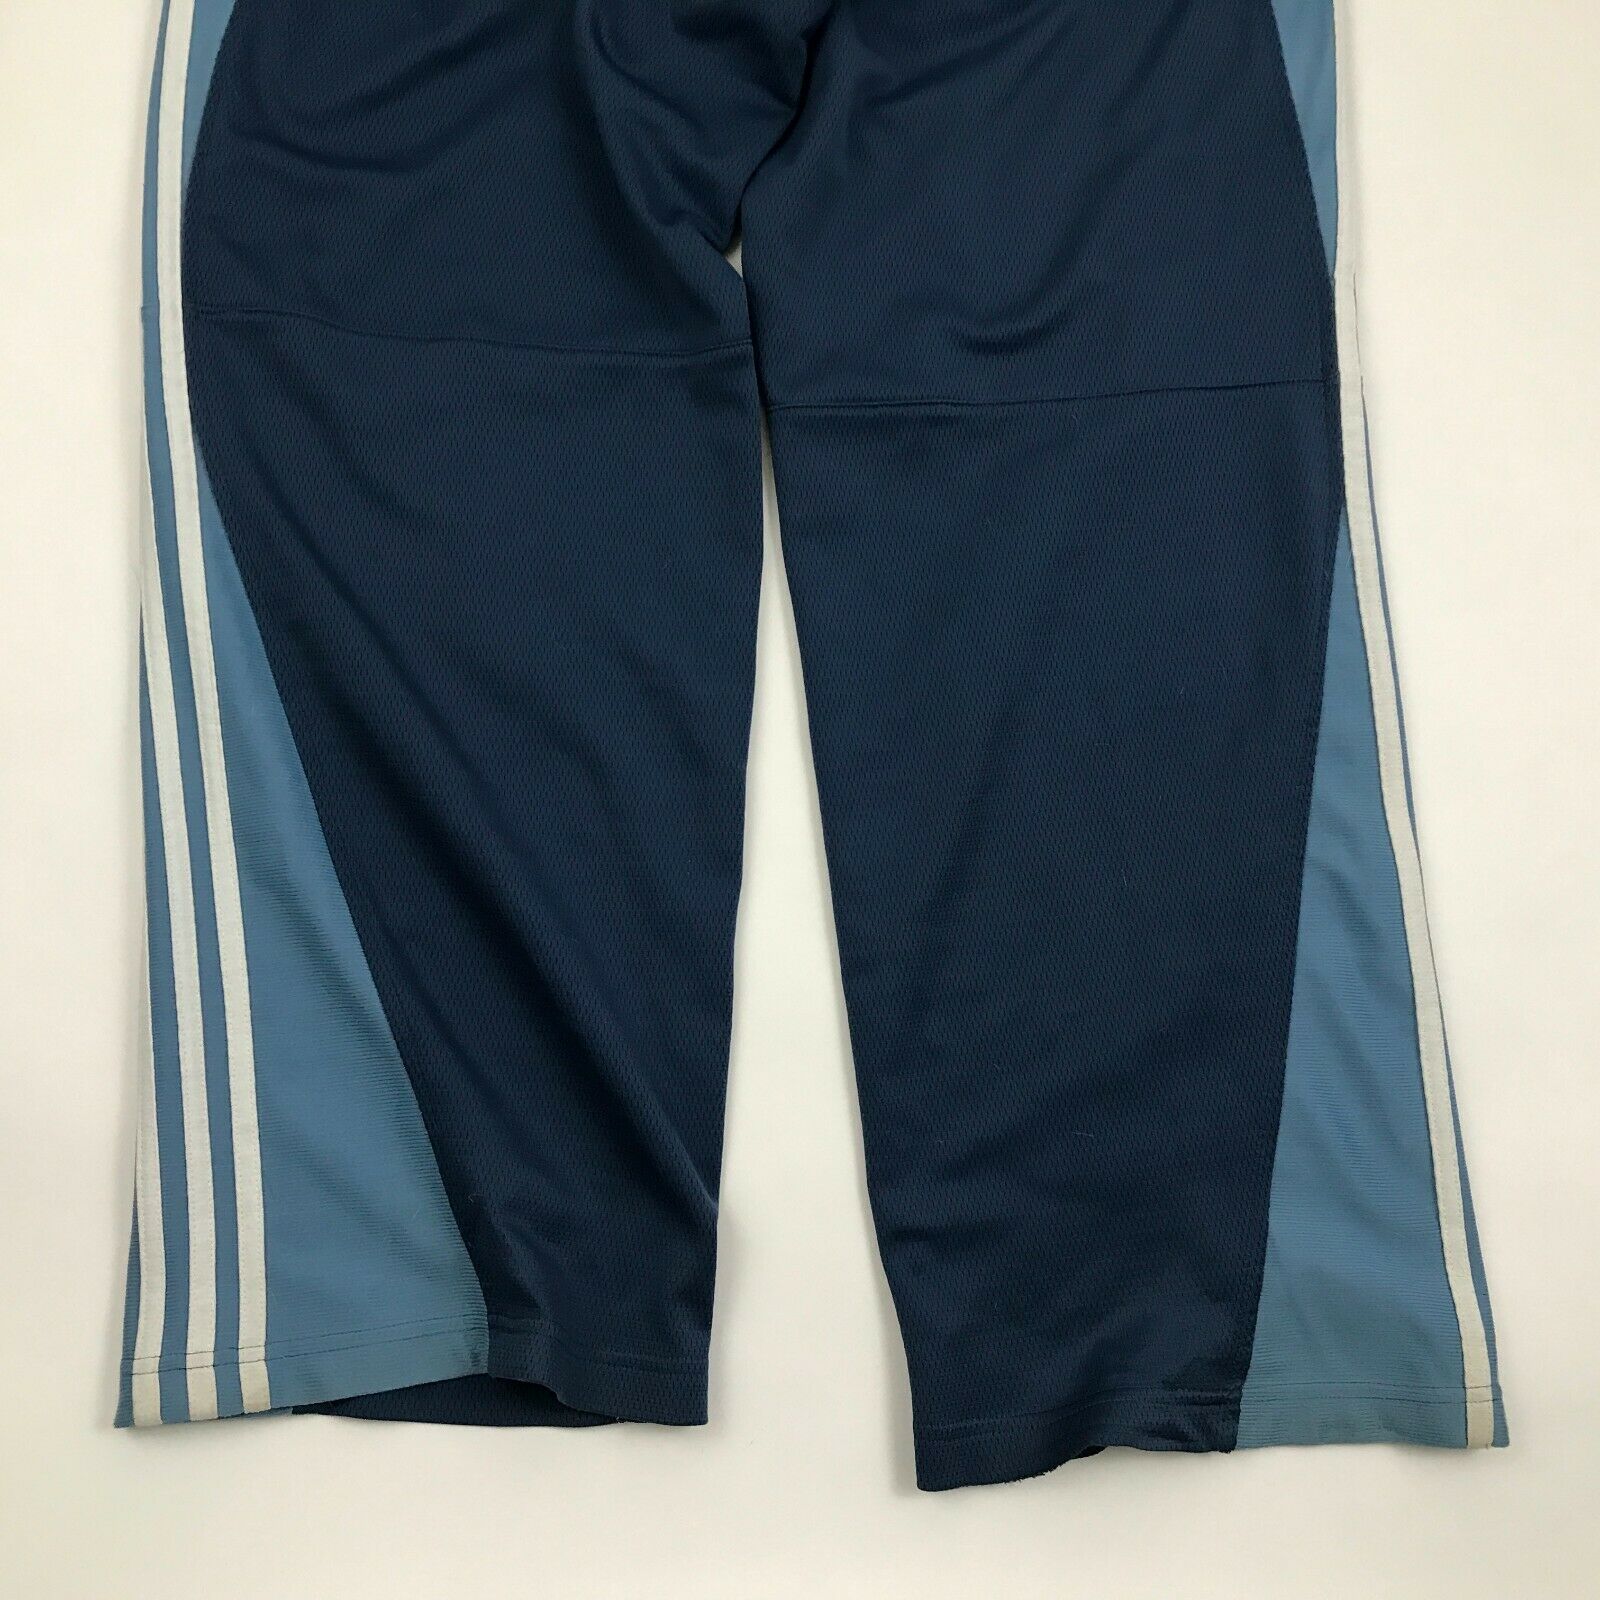 Adidas Mens Blue Workout Pants Size Medium M Warm Up Loose Fit Athletic ...